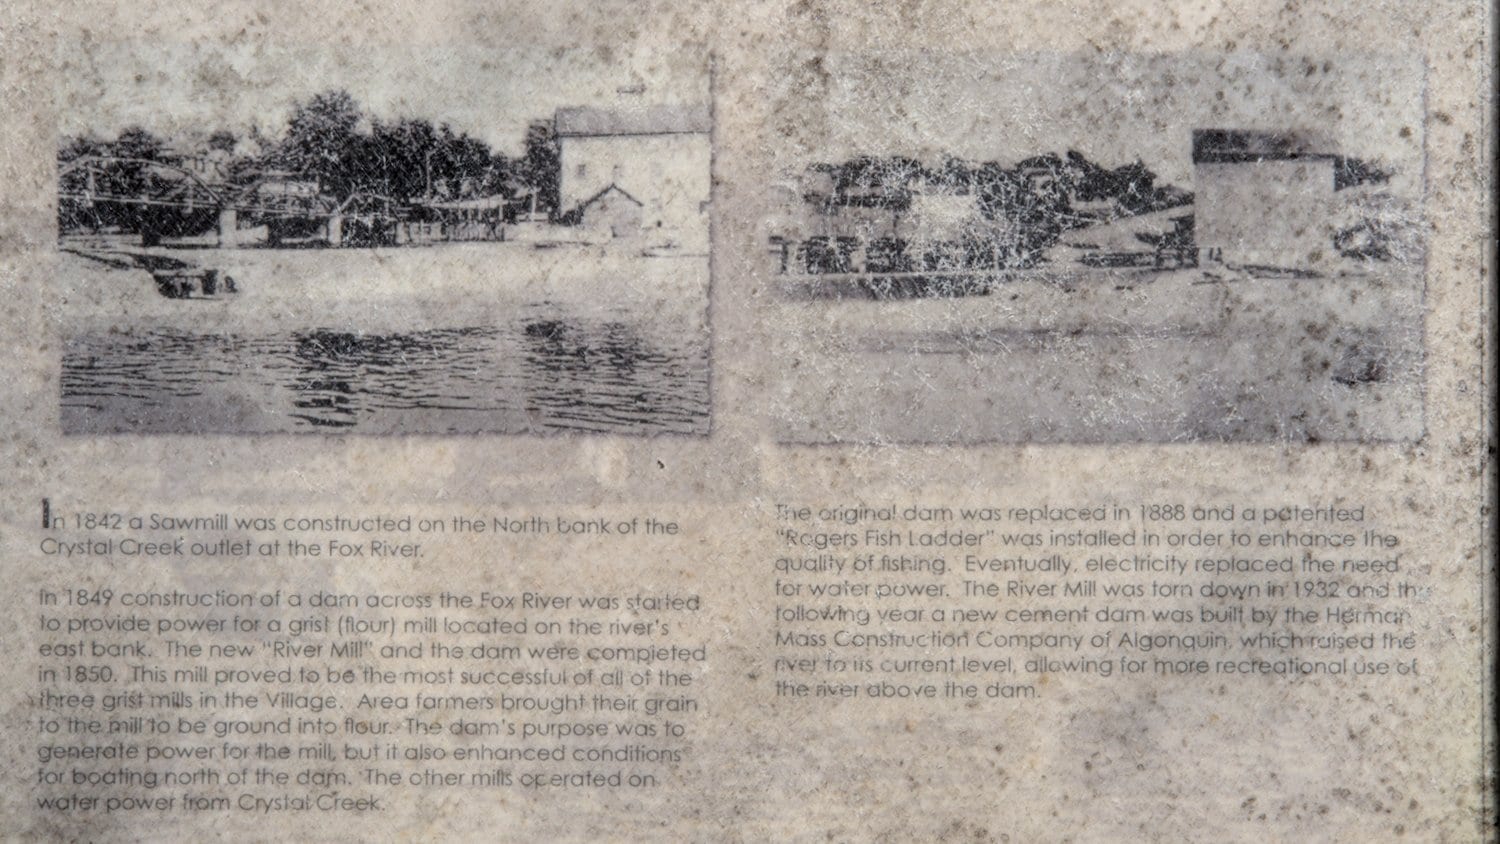 Historical plaque detailing the installation of the dam and the River Mill.